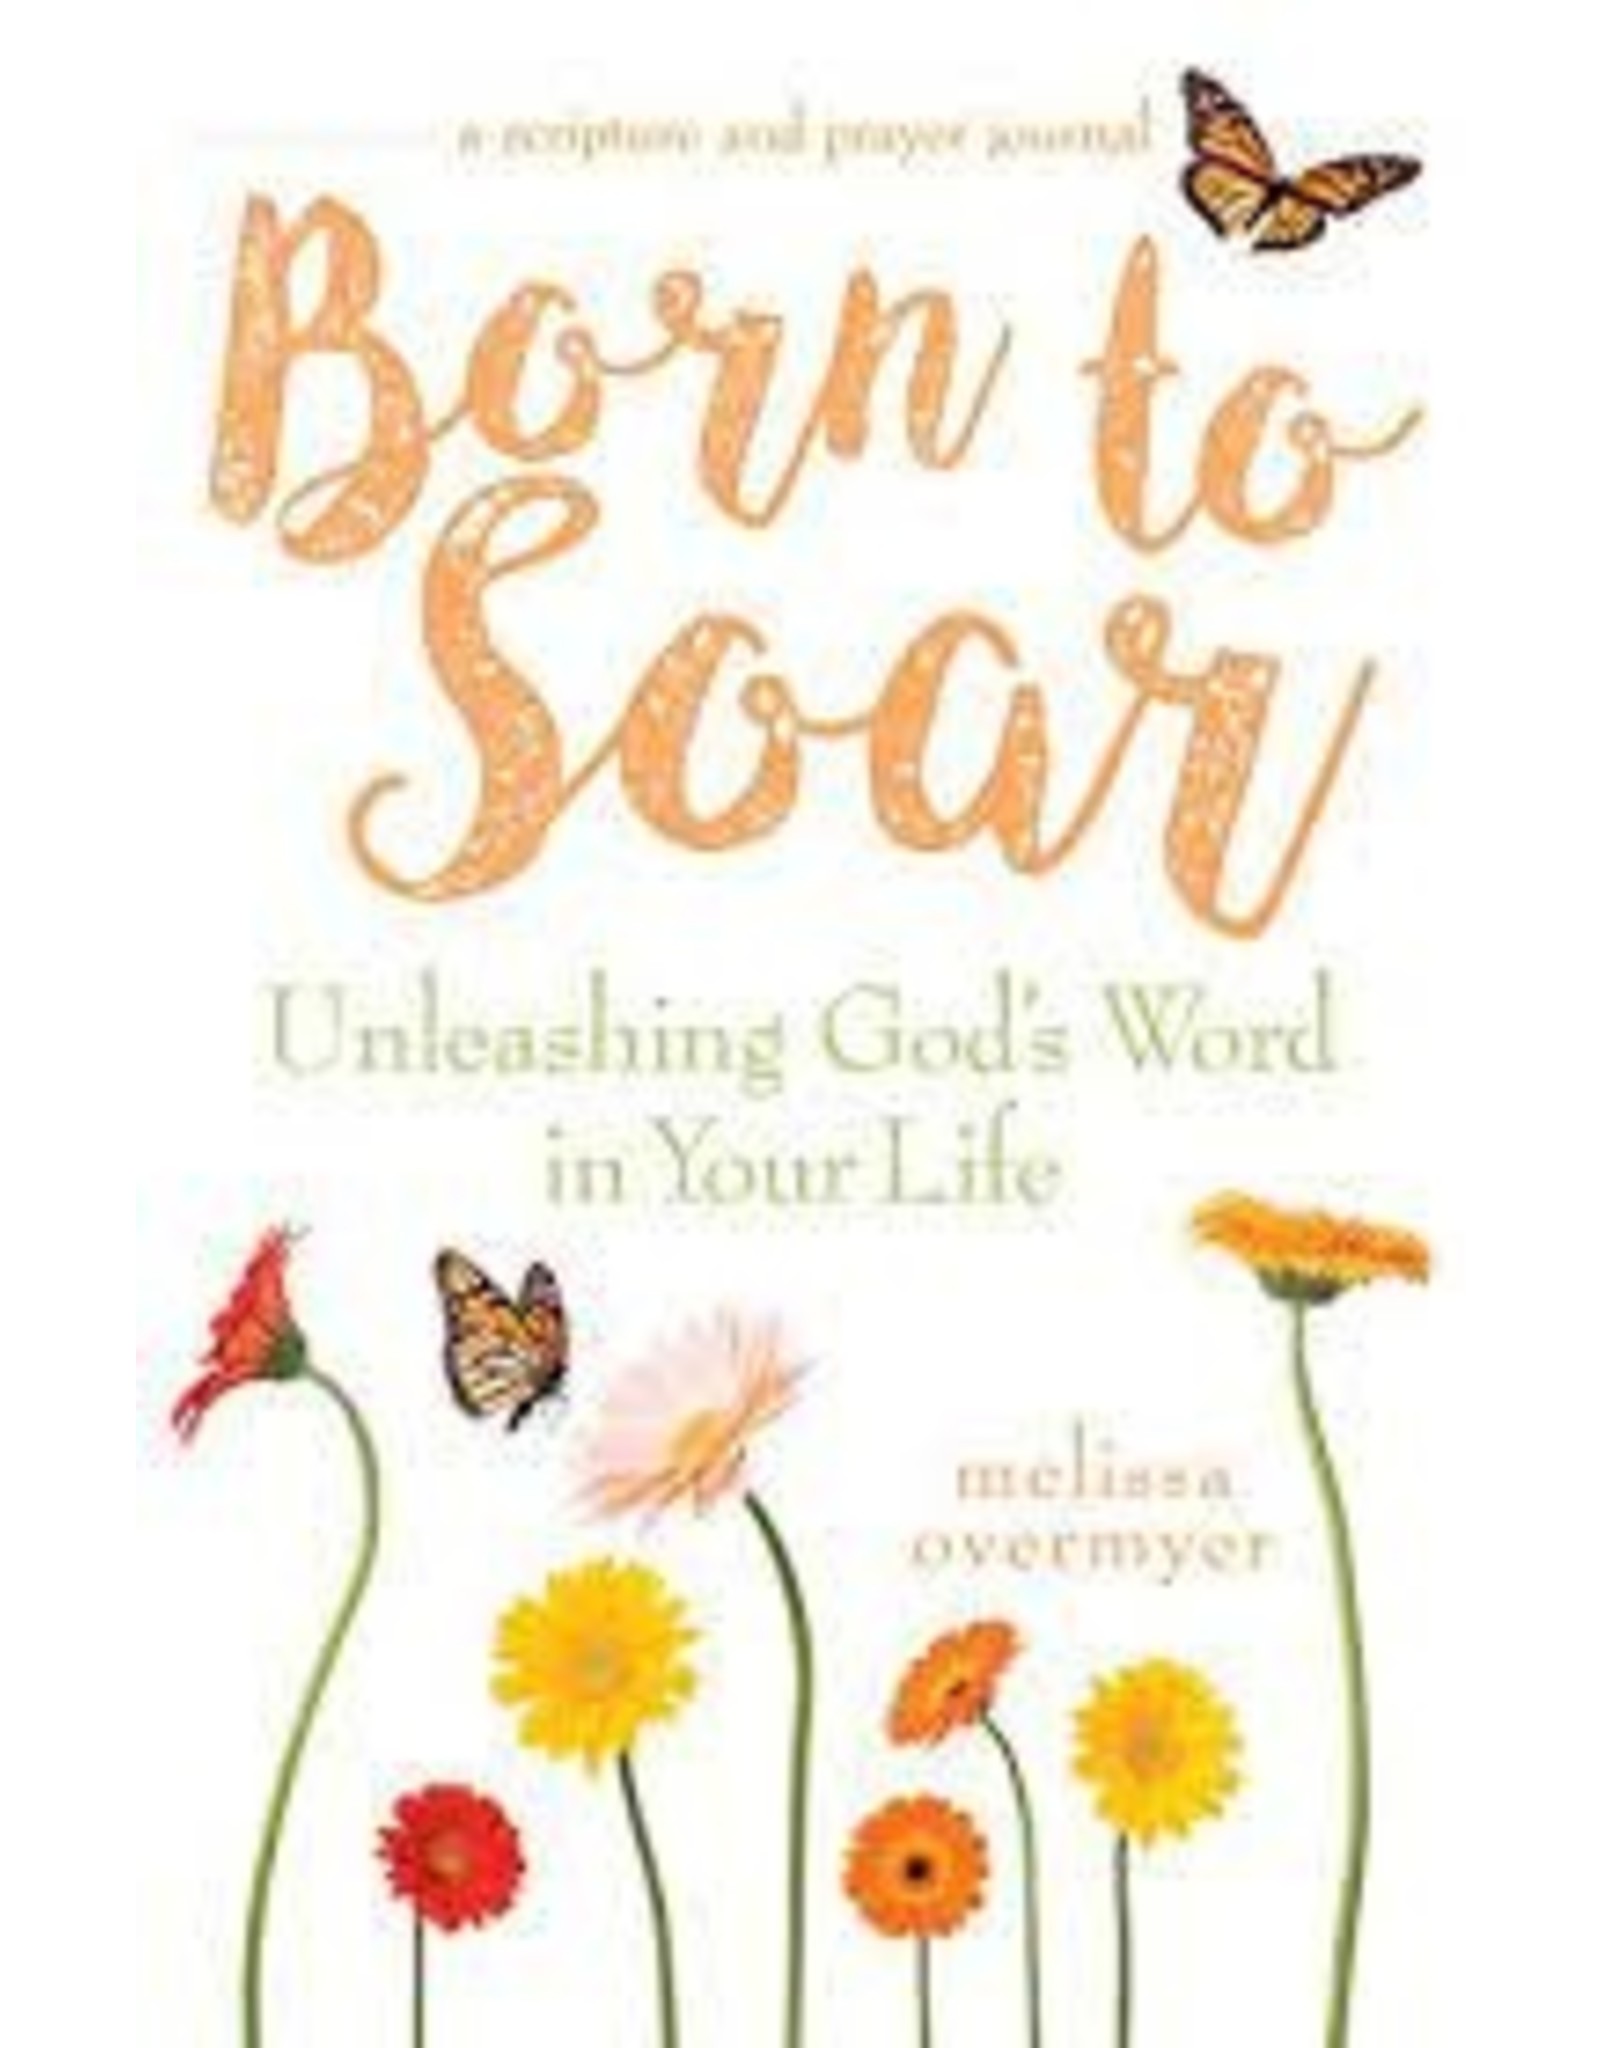 Born to Soar: Unleashing God's Word in Your Life